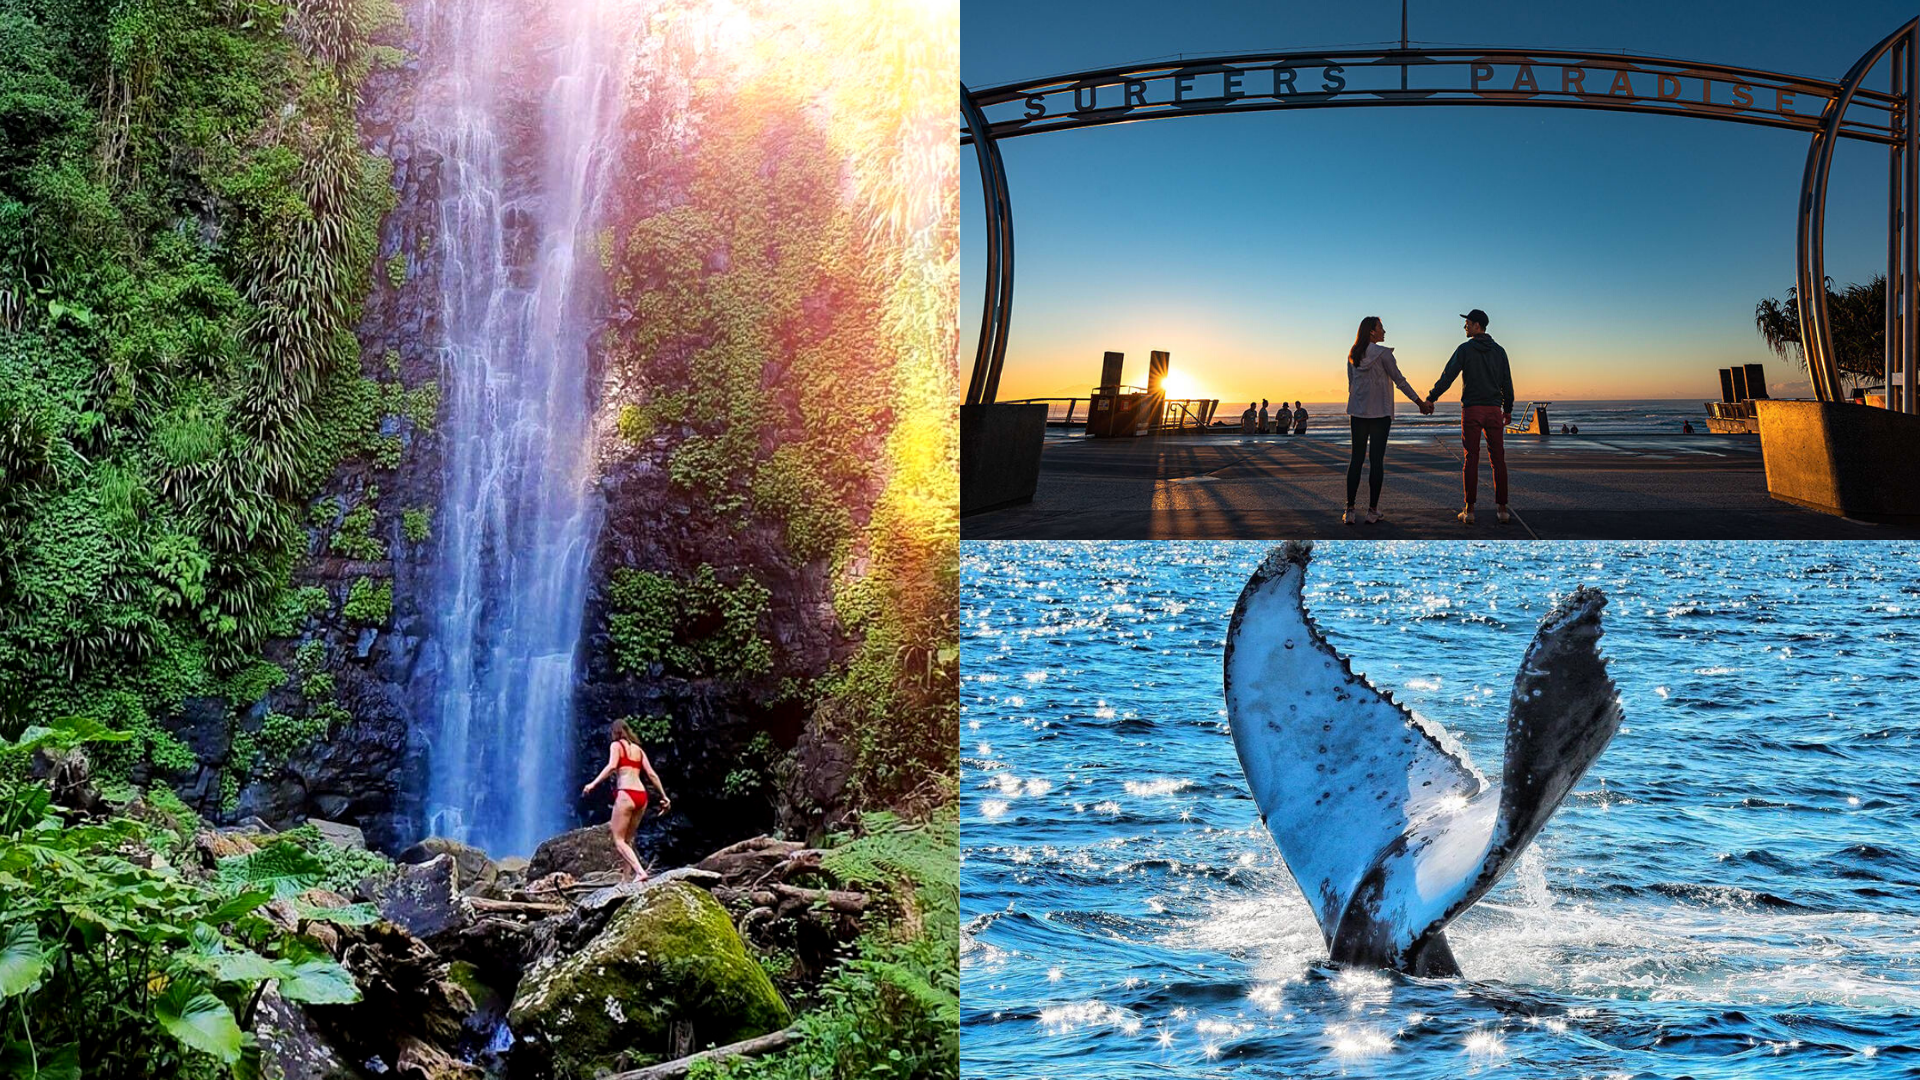 Reasons Gold Coast And Brisbane Are Post-Pandemic Dream Destinations - Klook Travel Blog